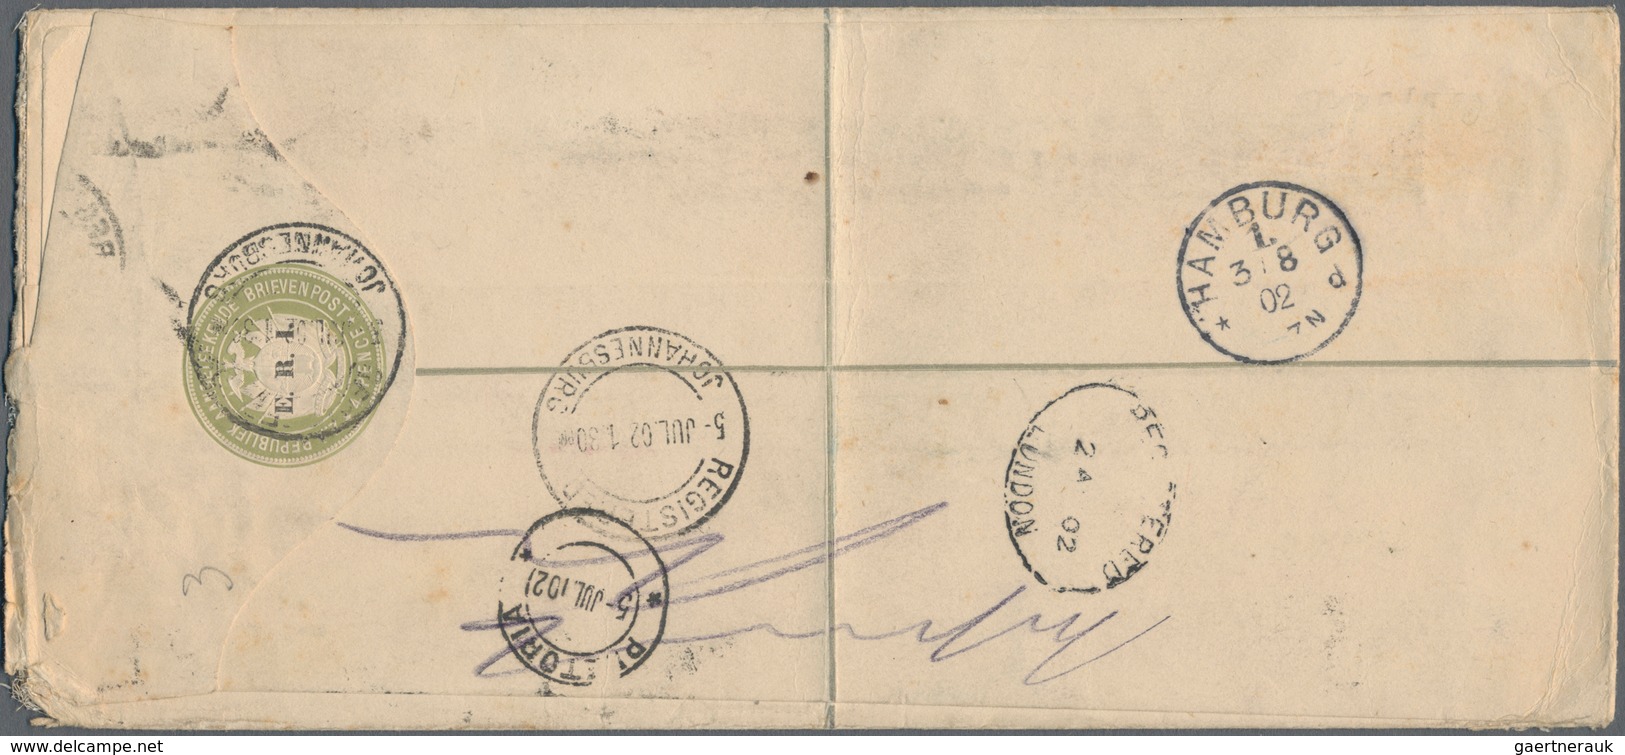 Transvaal: 1902 Uprated With Block Of Four Of 1 Penny Red/grey Registered Postal Stationery Envelope - Transvaal (1870-1909)